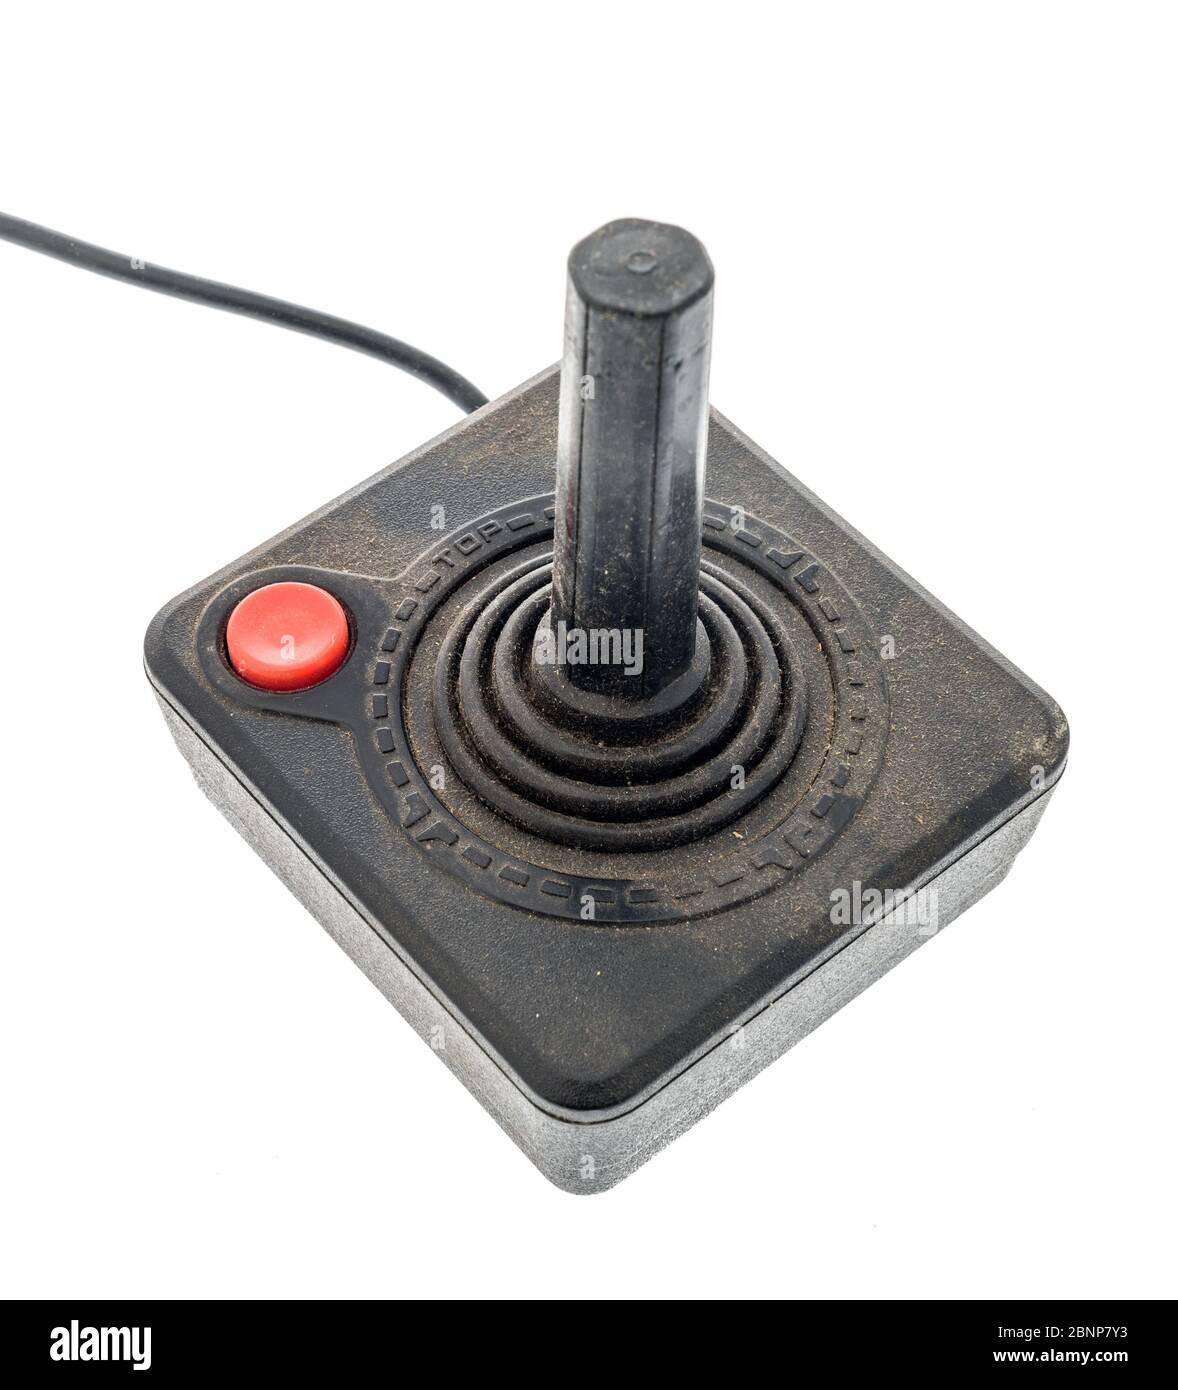 Winneconne,  WI - 5 May 2020:  A package of Atari 2600 joystick controller covered with dust on an isolated background Stock Photo